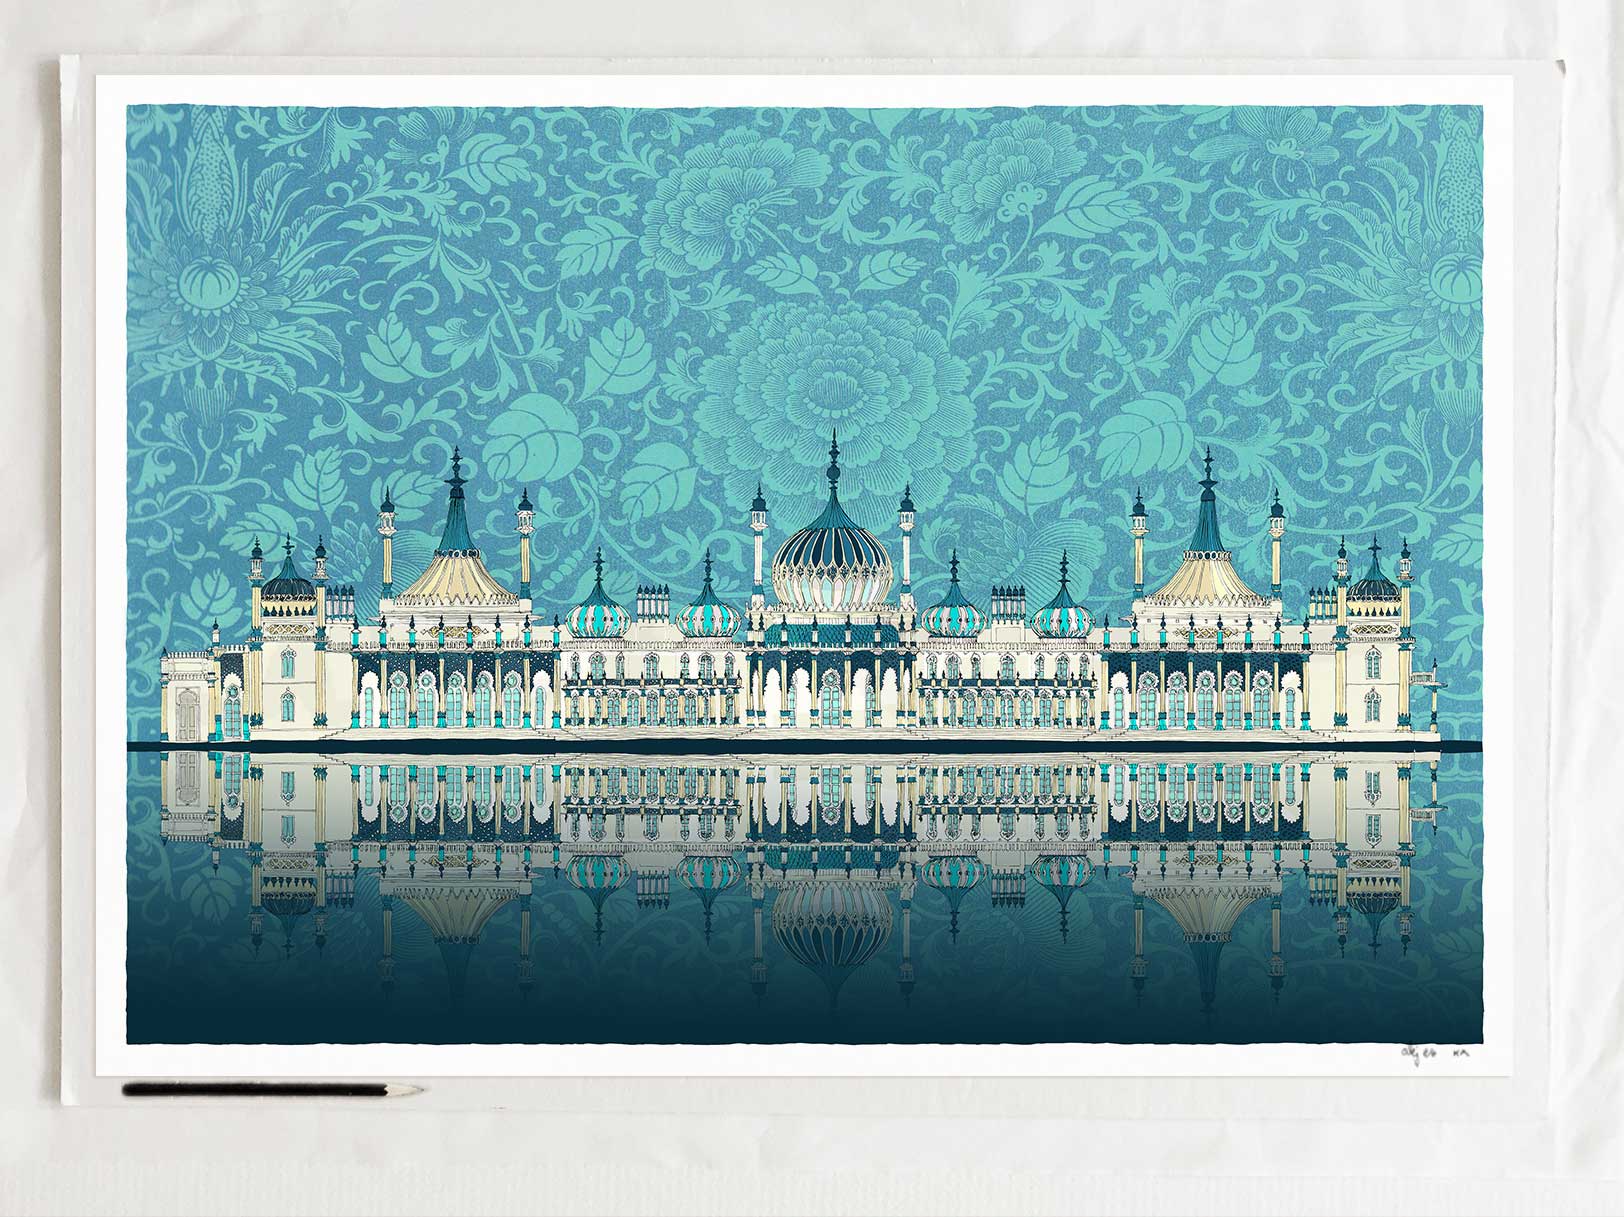 art print titled Brighton Royal Pavilion Chinese Dragons and Dolphins Crystal Blue by artist alej ez